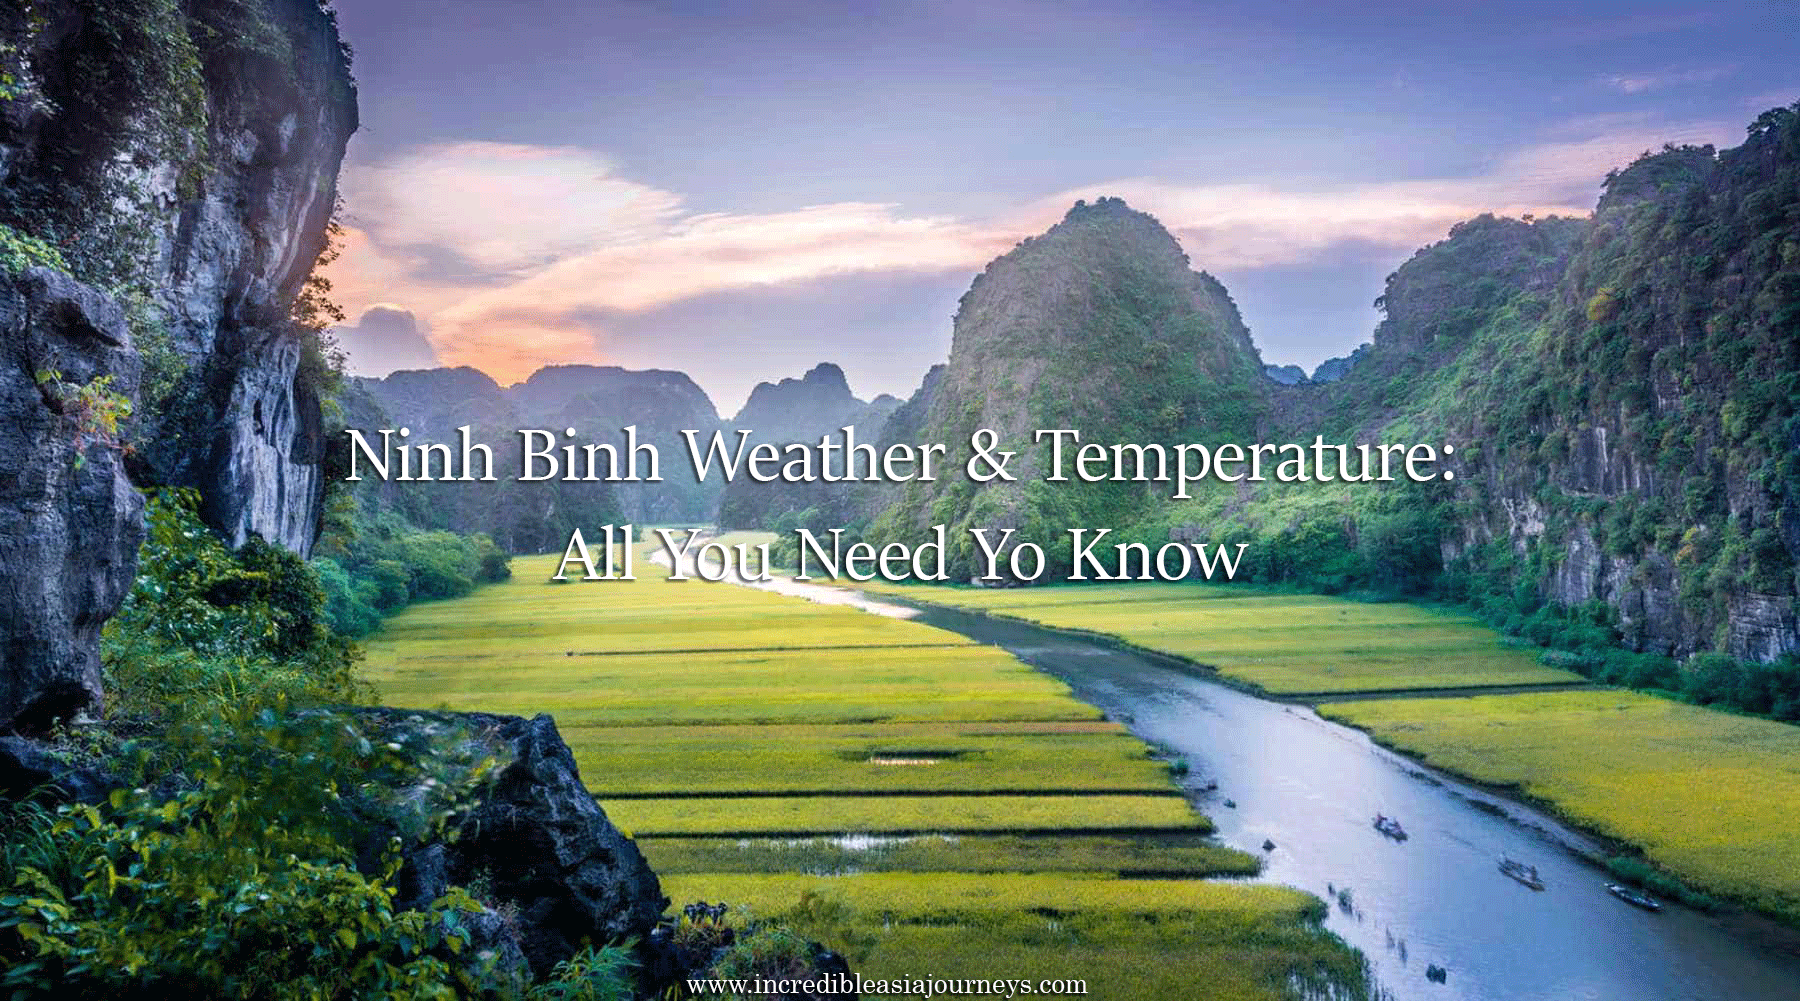 Ninh Binh Weather & Temperature: All You Need to Know